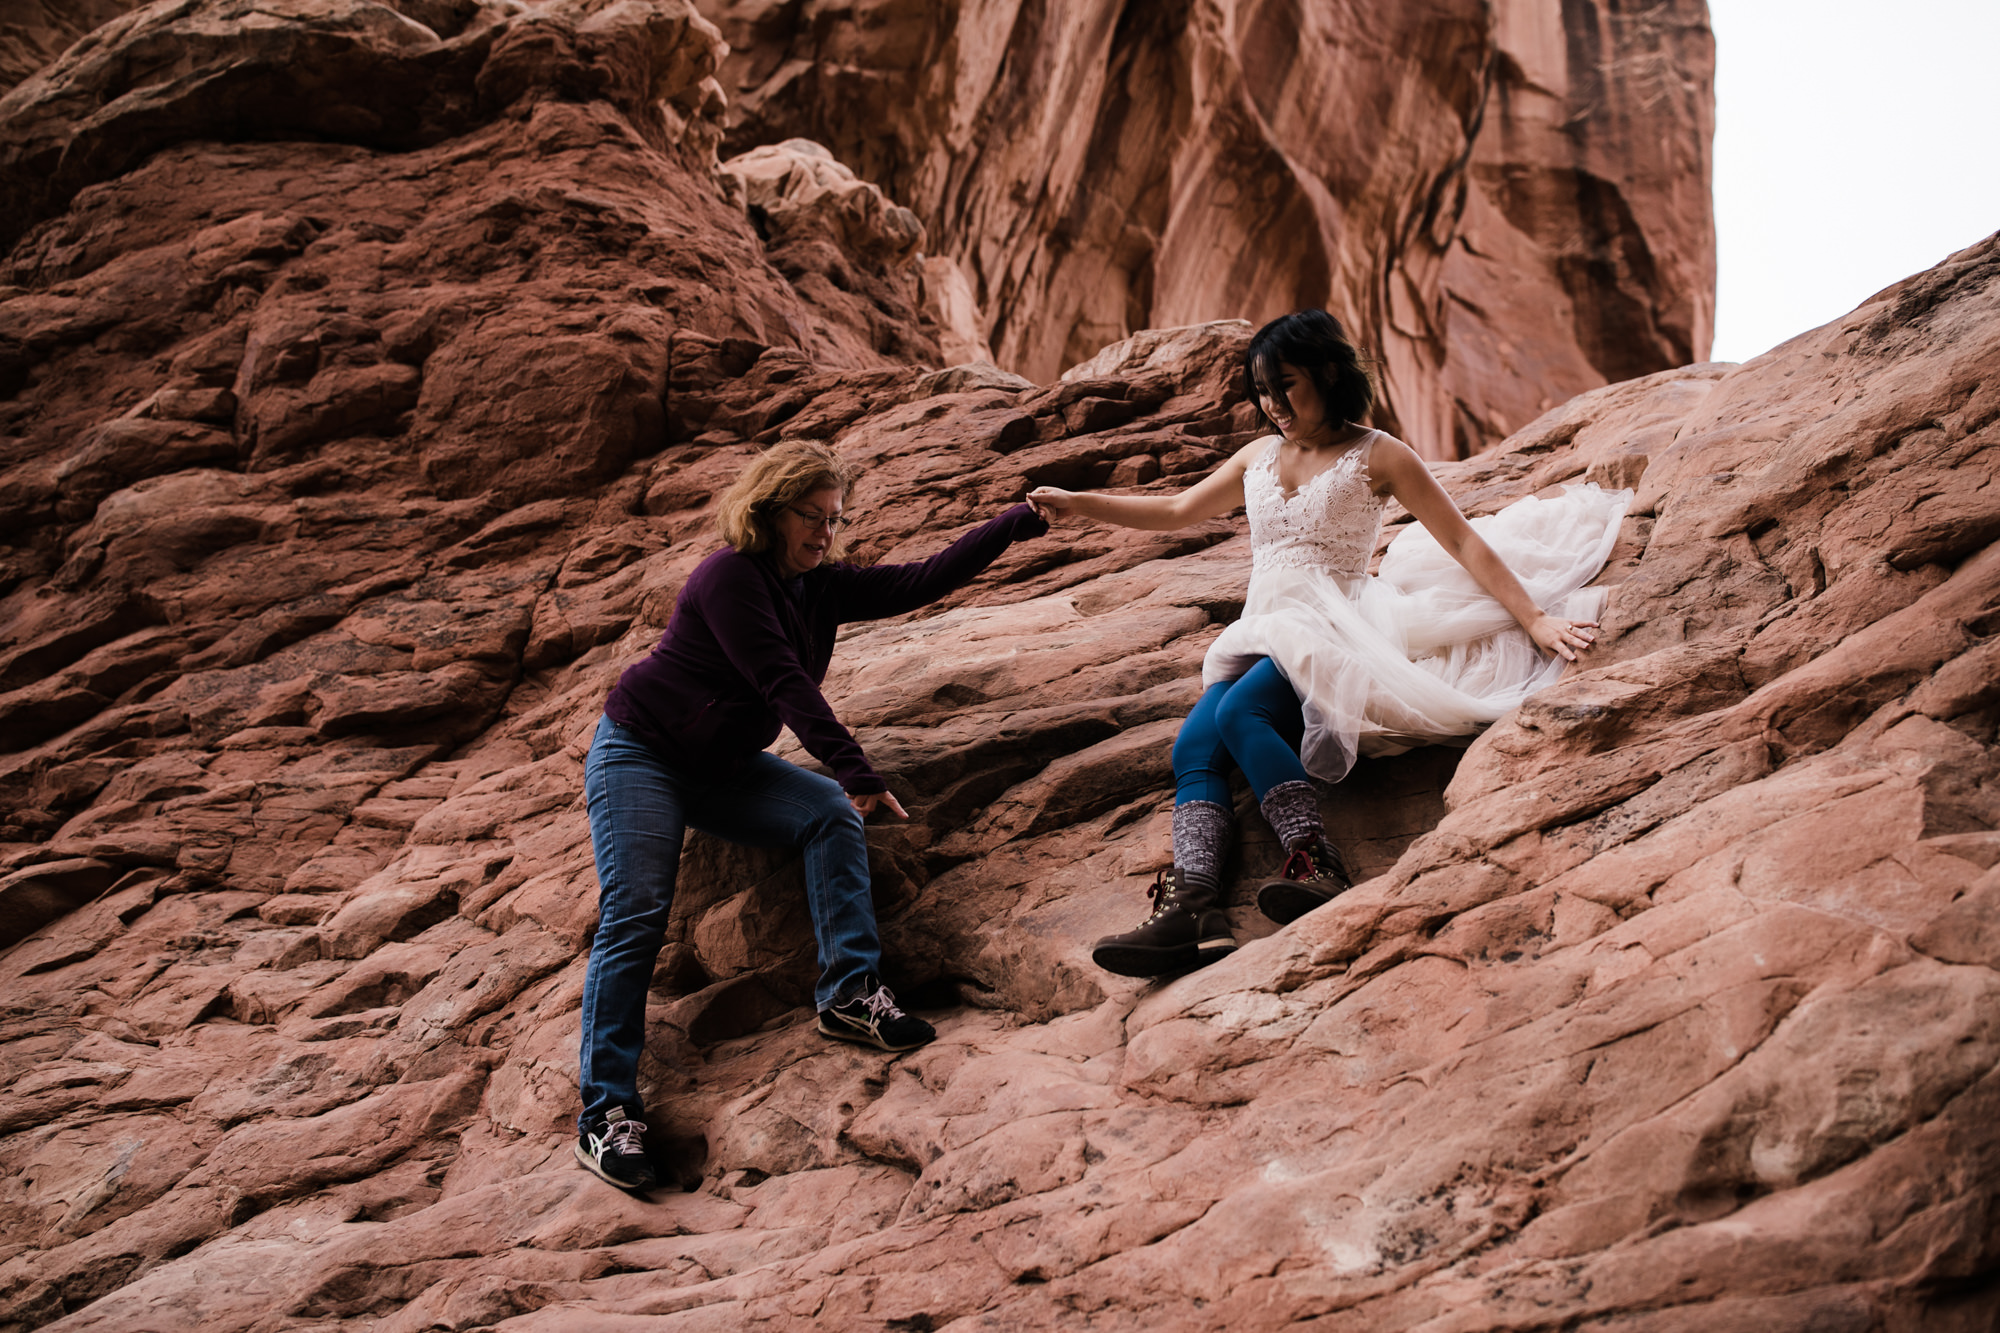 elopement first look in arches national park | desert elopement | moab wedding photographer | the hearnes adventure photography | www.thehearnes.com